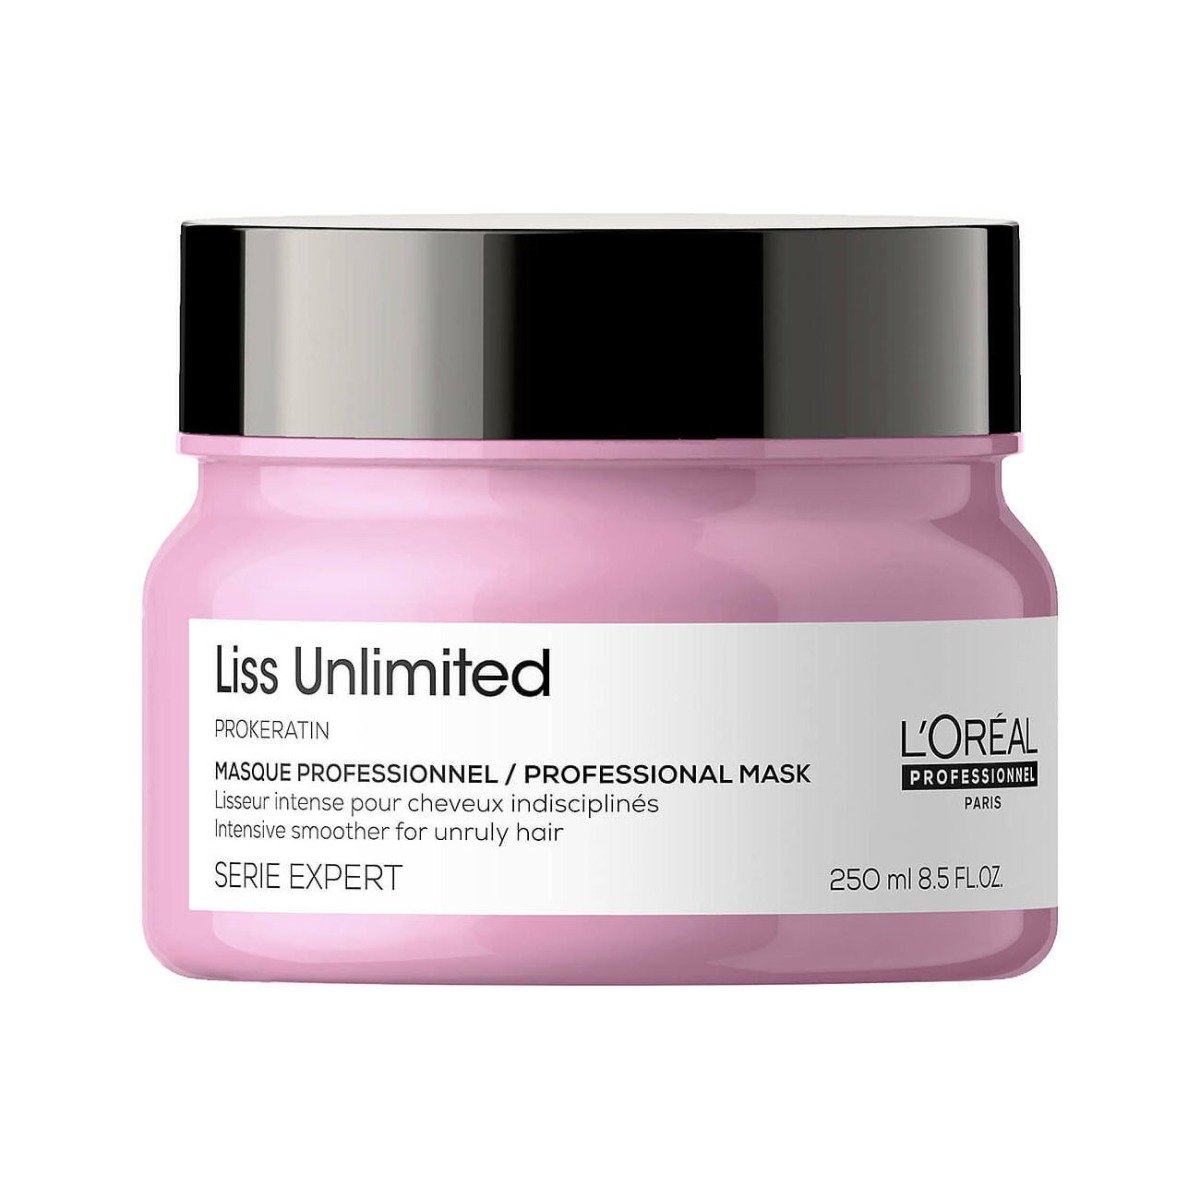 L'Oreal Professionnel Serie Expert Liss Unlimited Hair Mask - 250ml - Bloom Pharmacy